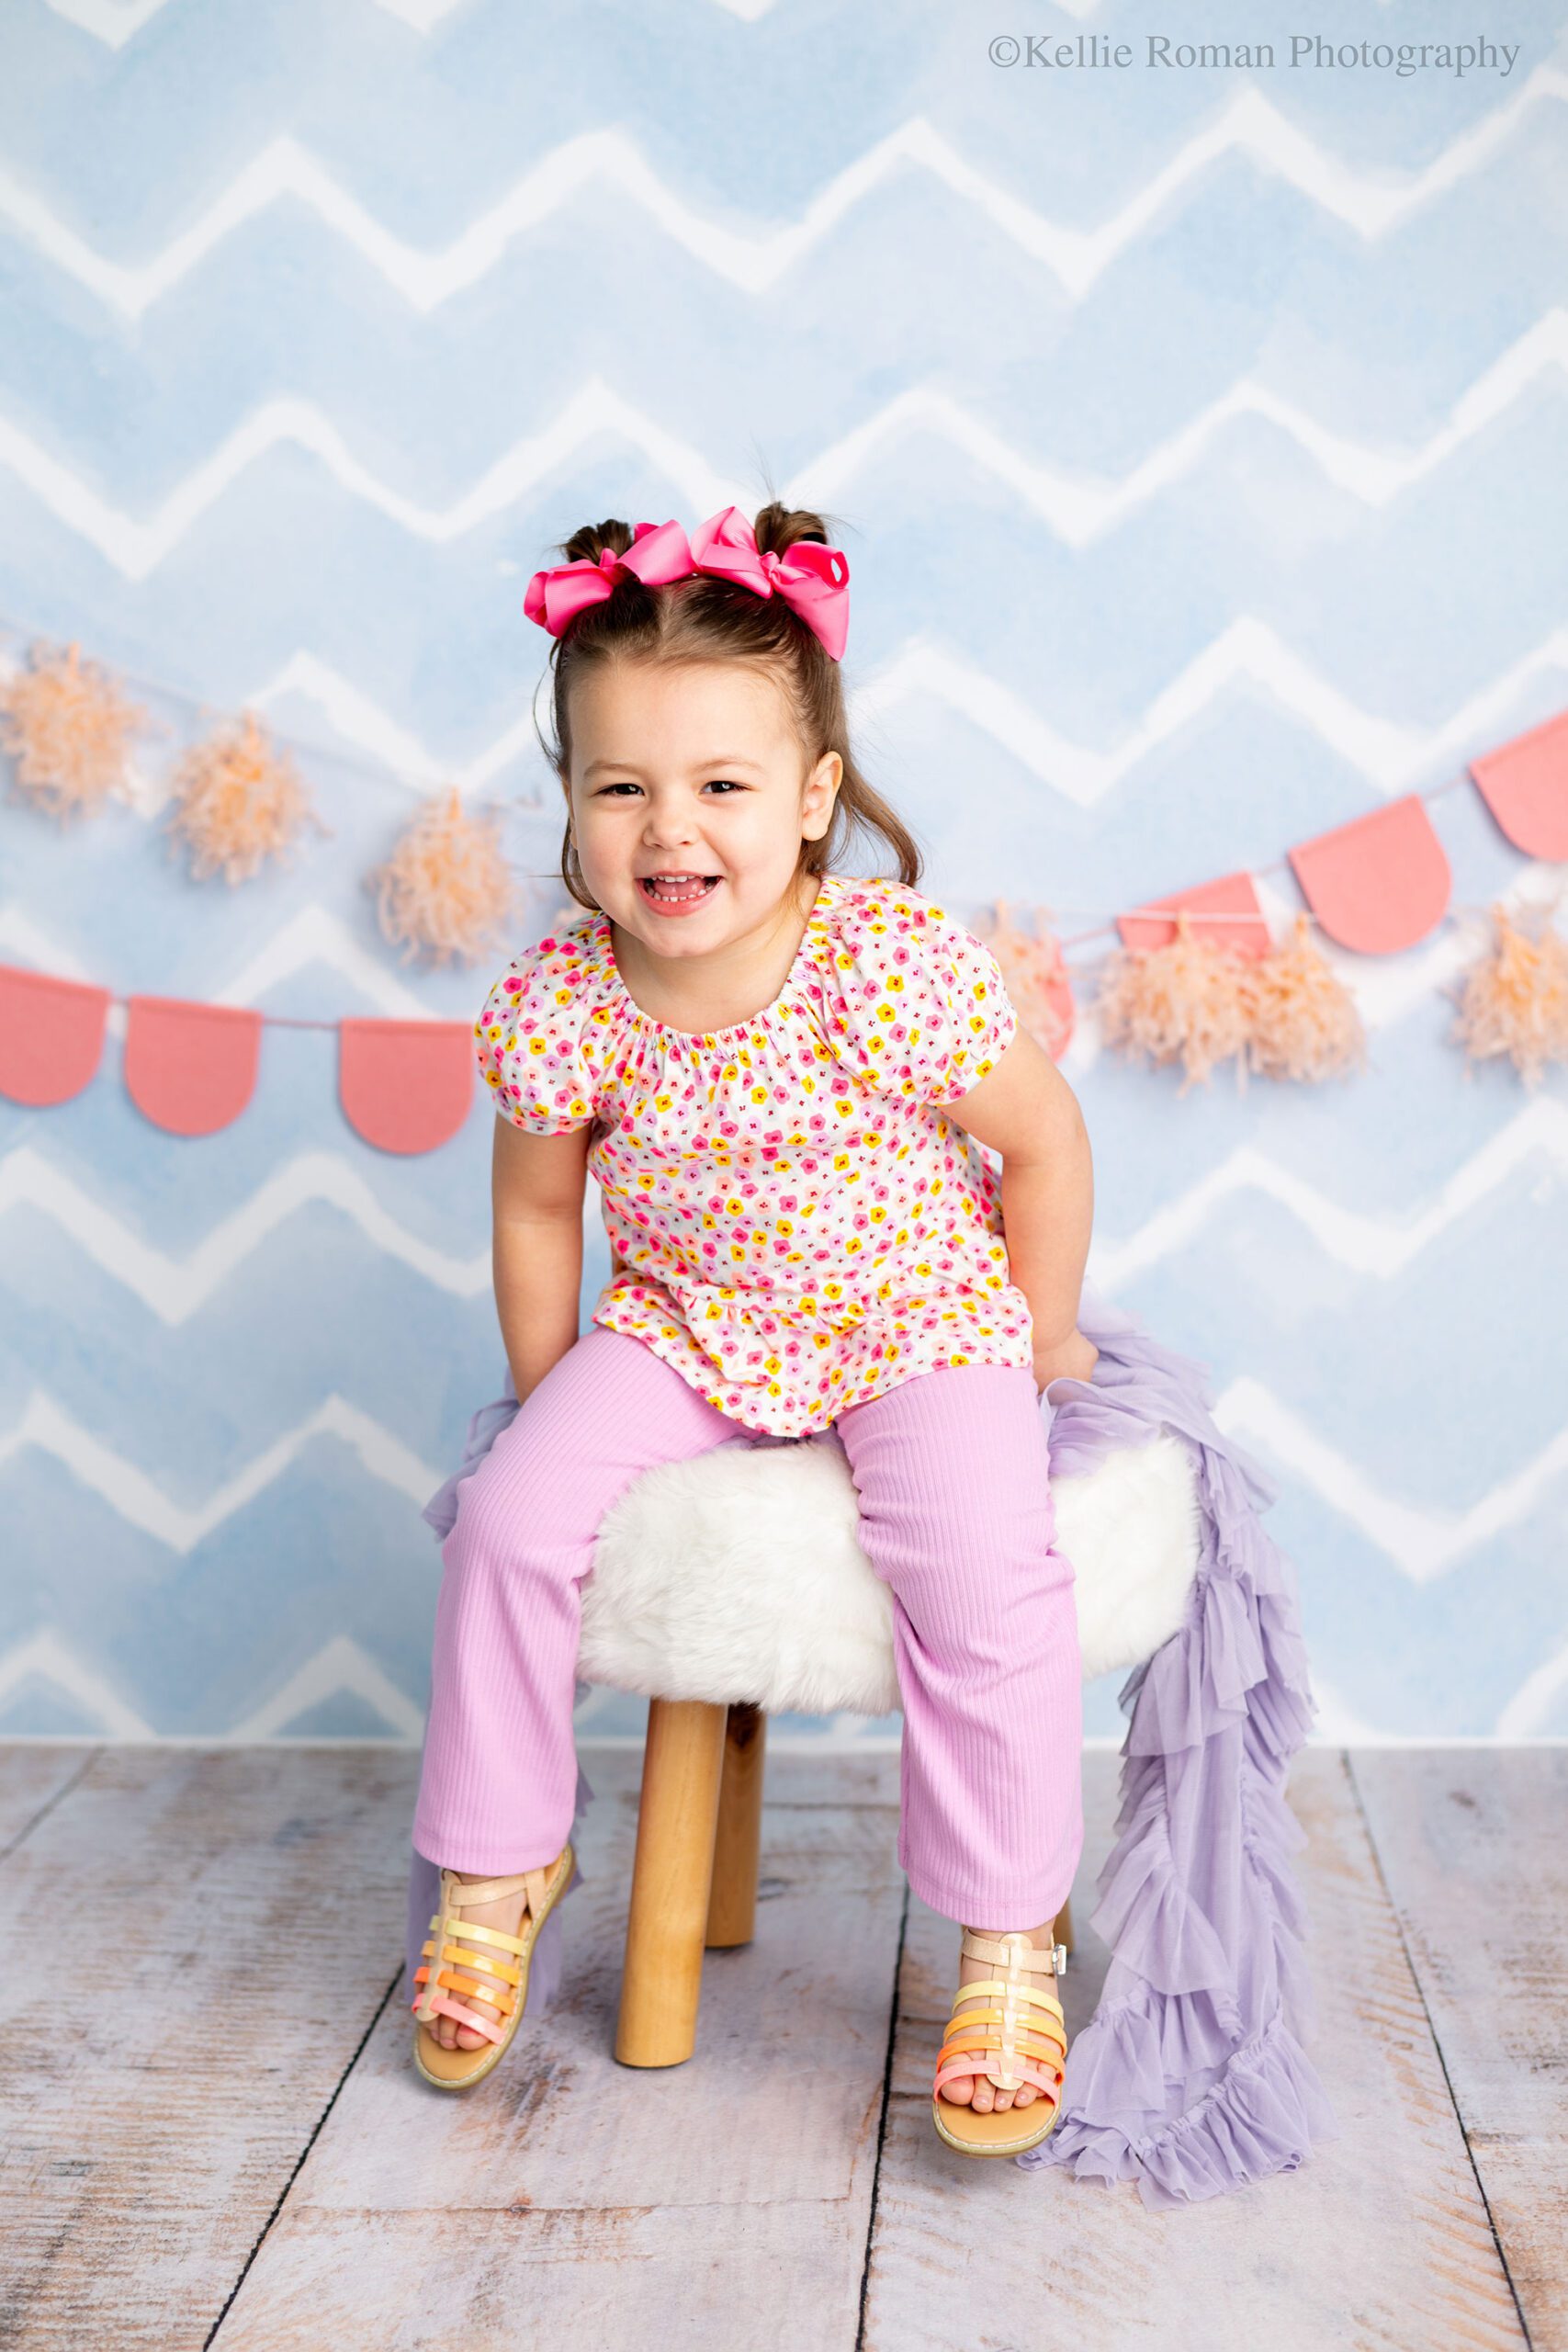 photographer near me. three year old girl smiling big sitting on a white fluffy stool. she has on a colorful shirt with flowers, light purple pants, pink bows in her pig tails and sandals. the backdrop is light blue zigzag with pink and peach banners. 